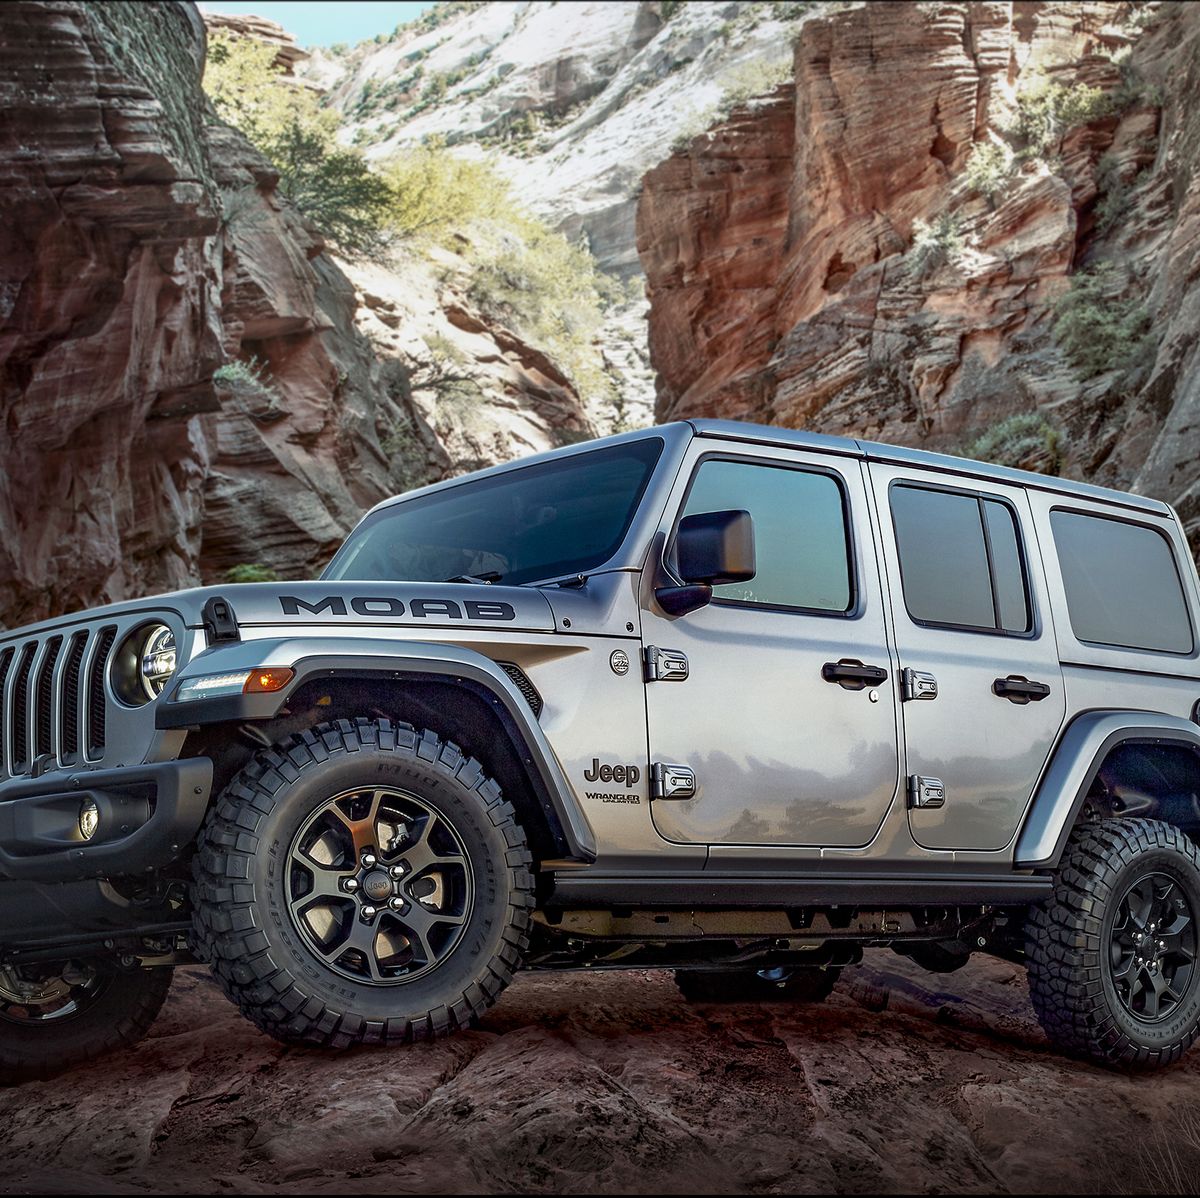 Jeep Says It Has a Fix For Wrangler 